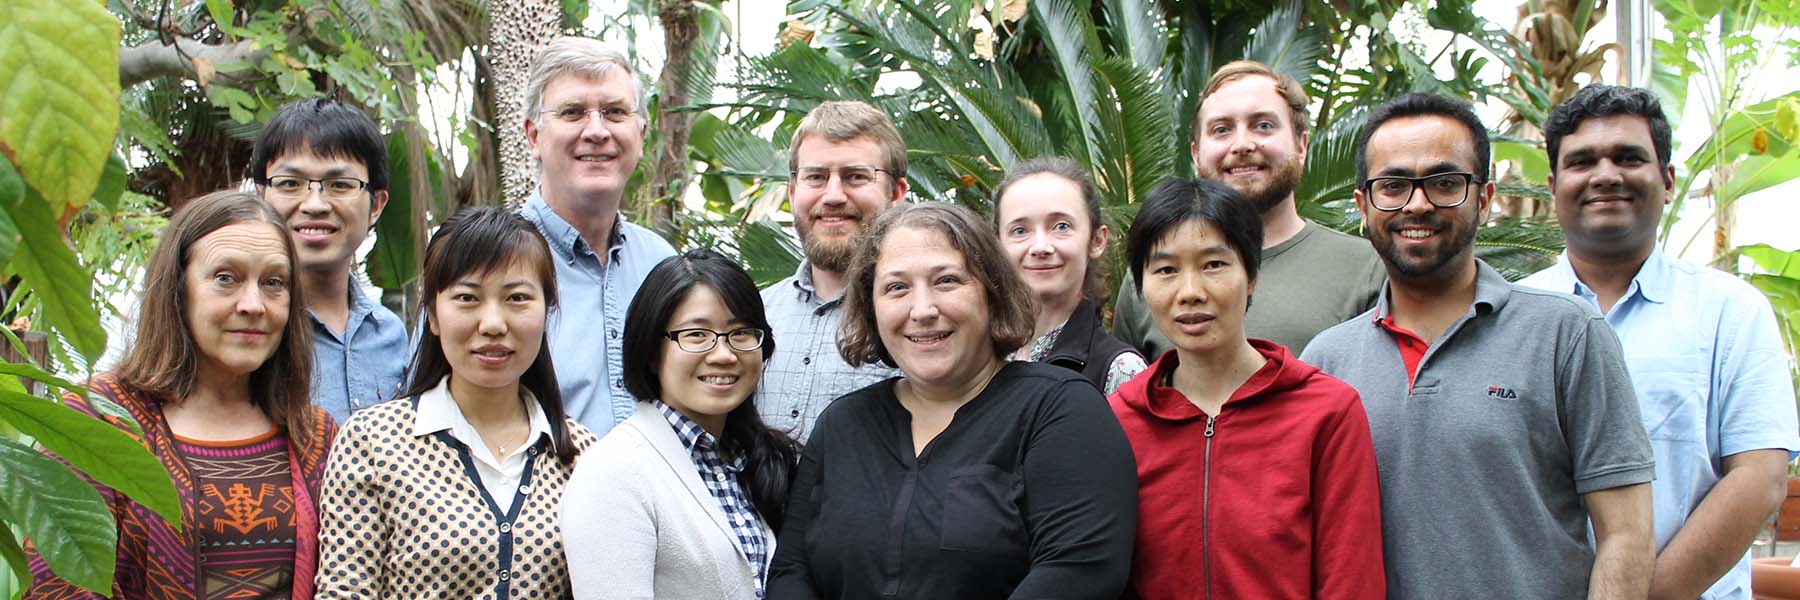 Pikaard lab members pose for group photo in the Jordan Hall greenhouse, February 28, 2017.